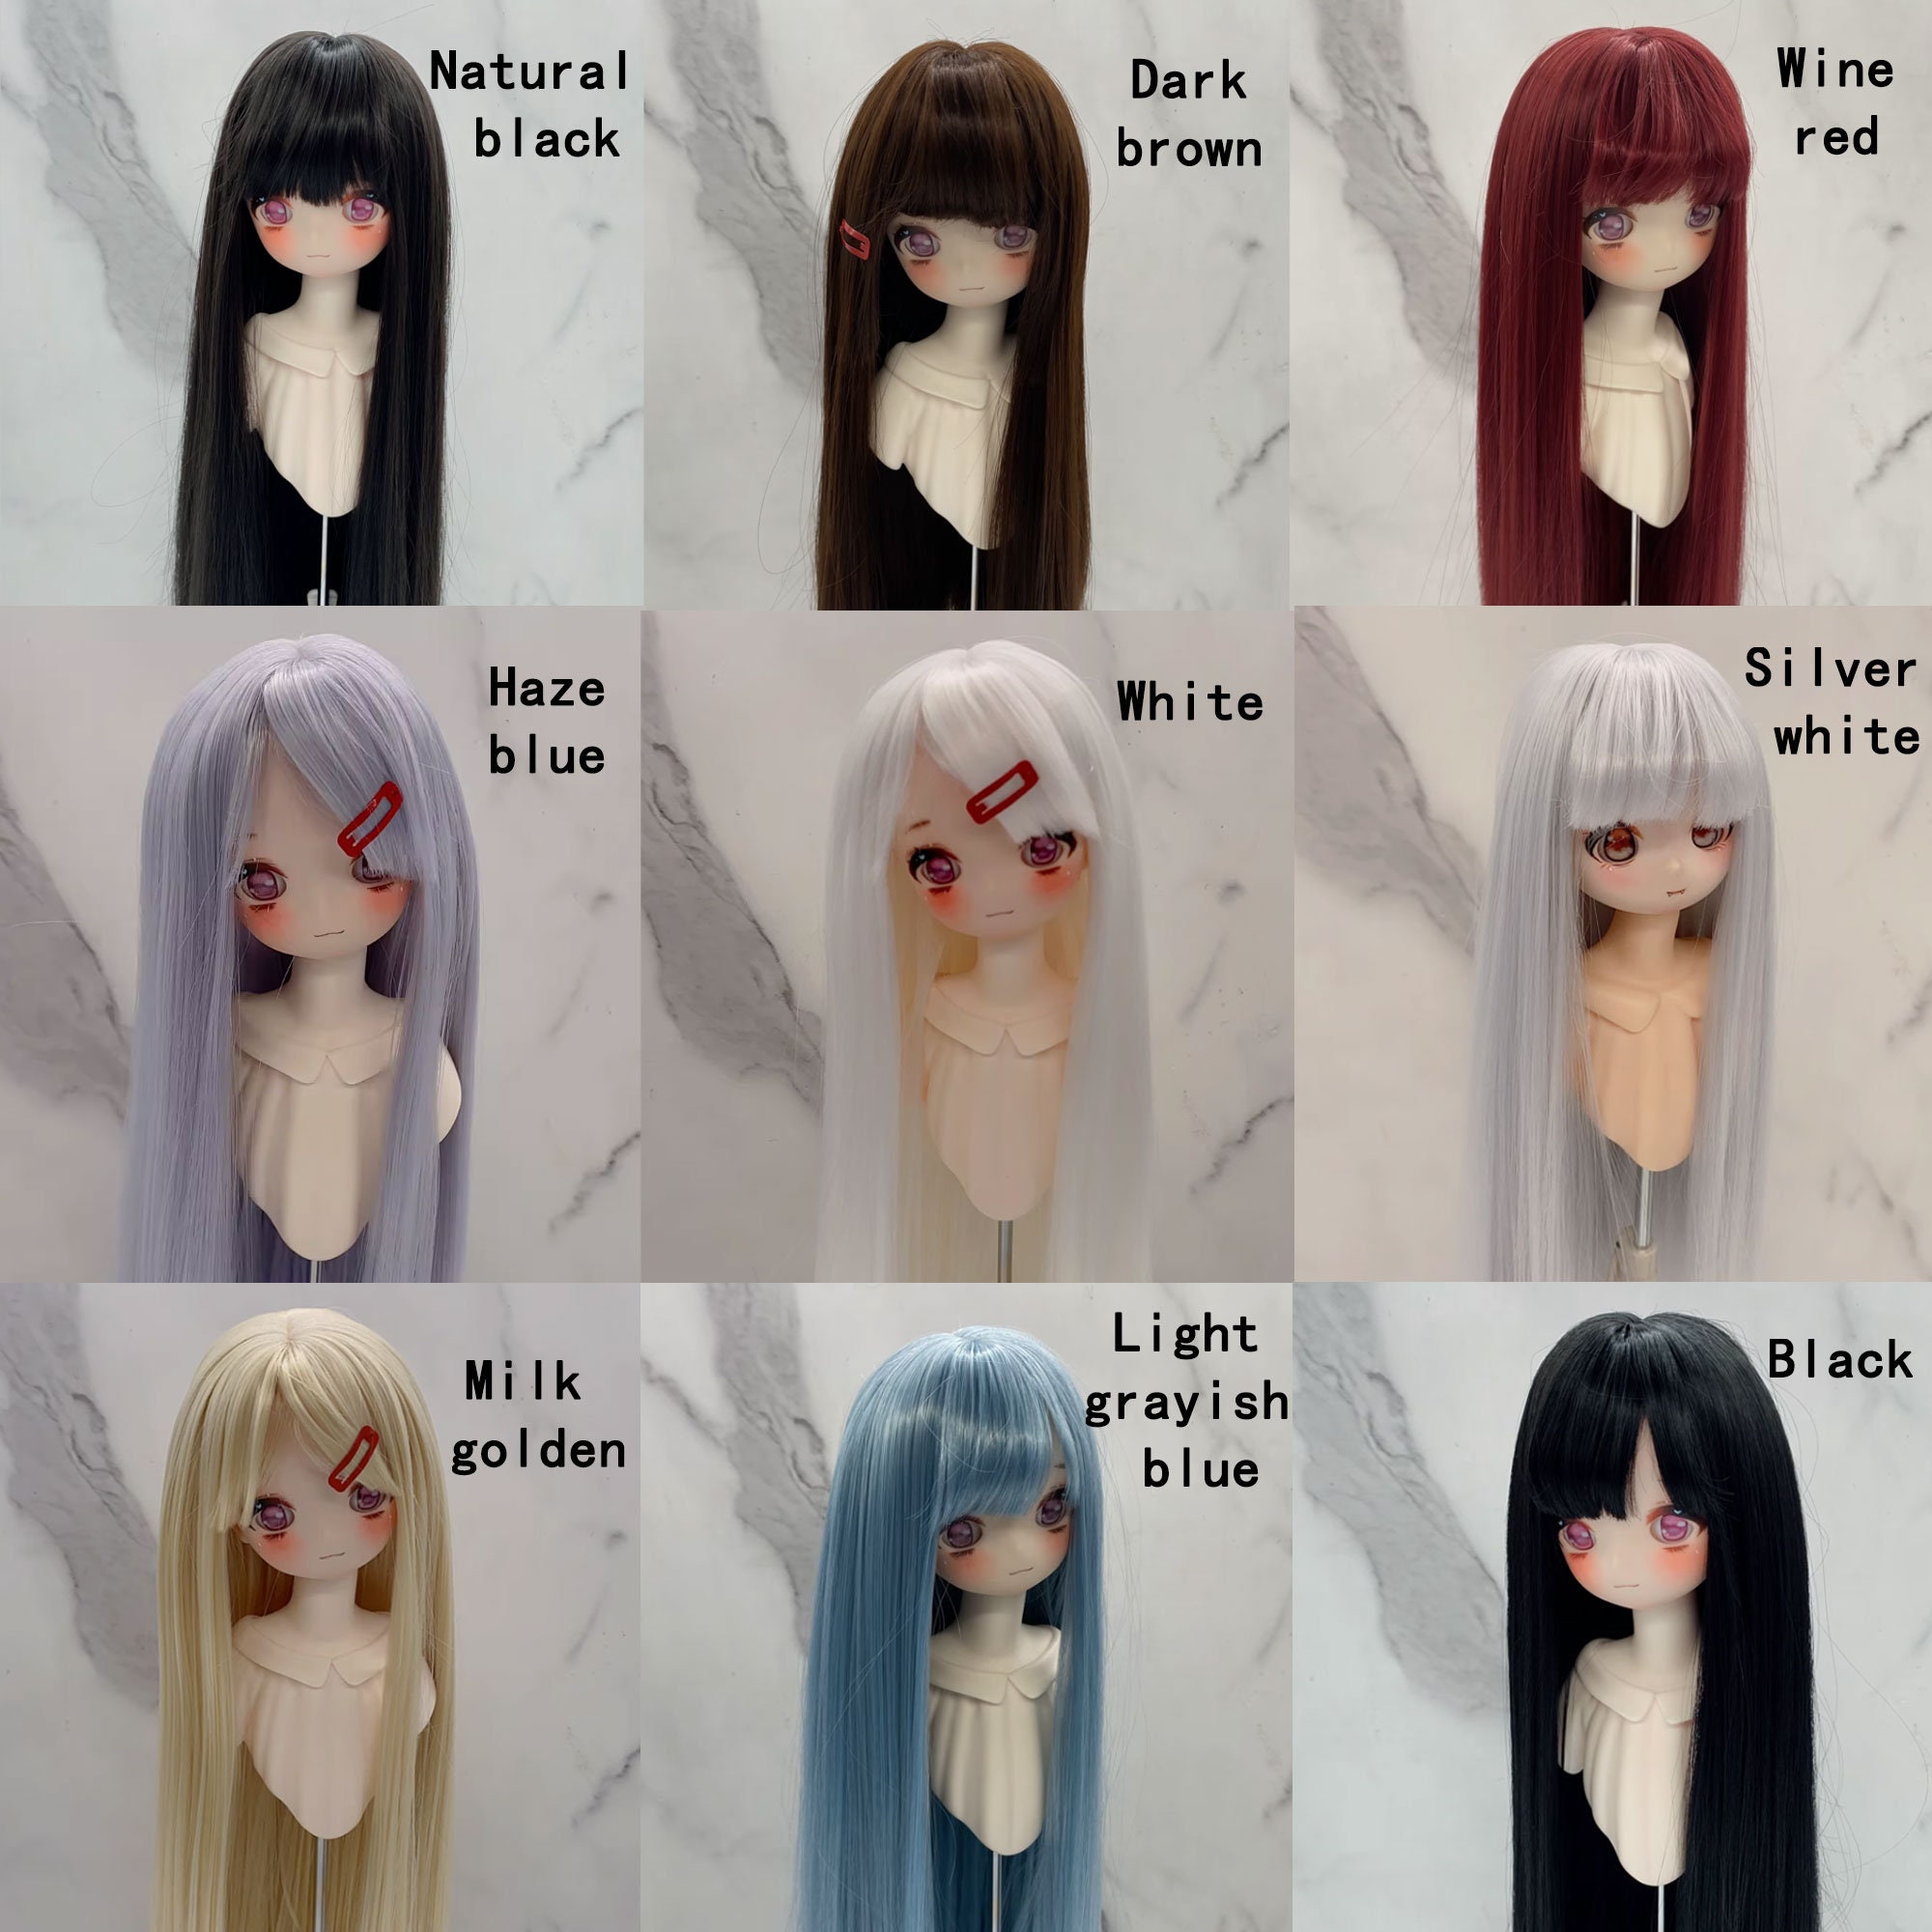 EXCEART 10 Pcs Doll Hair for Crafts Mohair Doll Hair Curly Doll Wig Doll  Curly Hair Wig DIY Doll Hair Doll Hair Wefts for Dolls Wig Making Doll Wigs